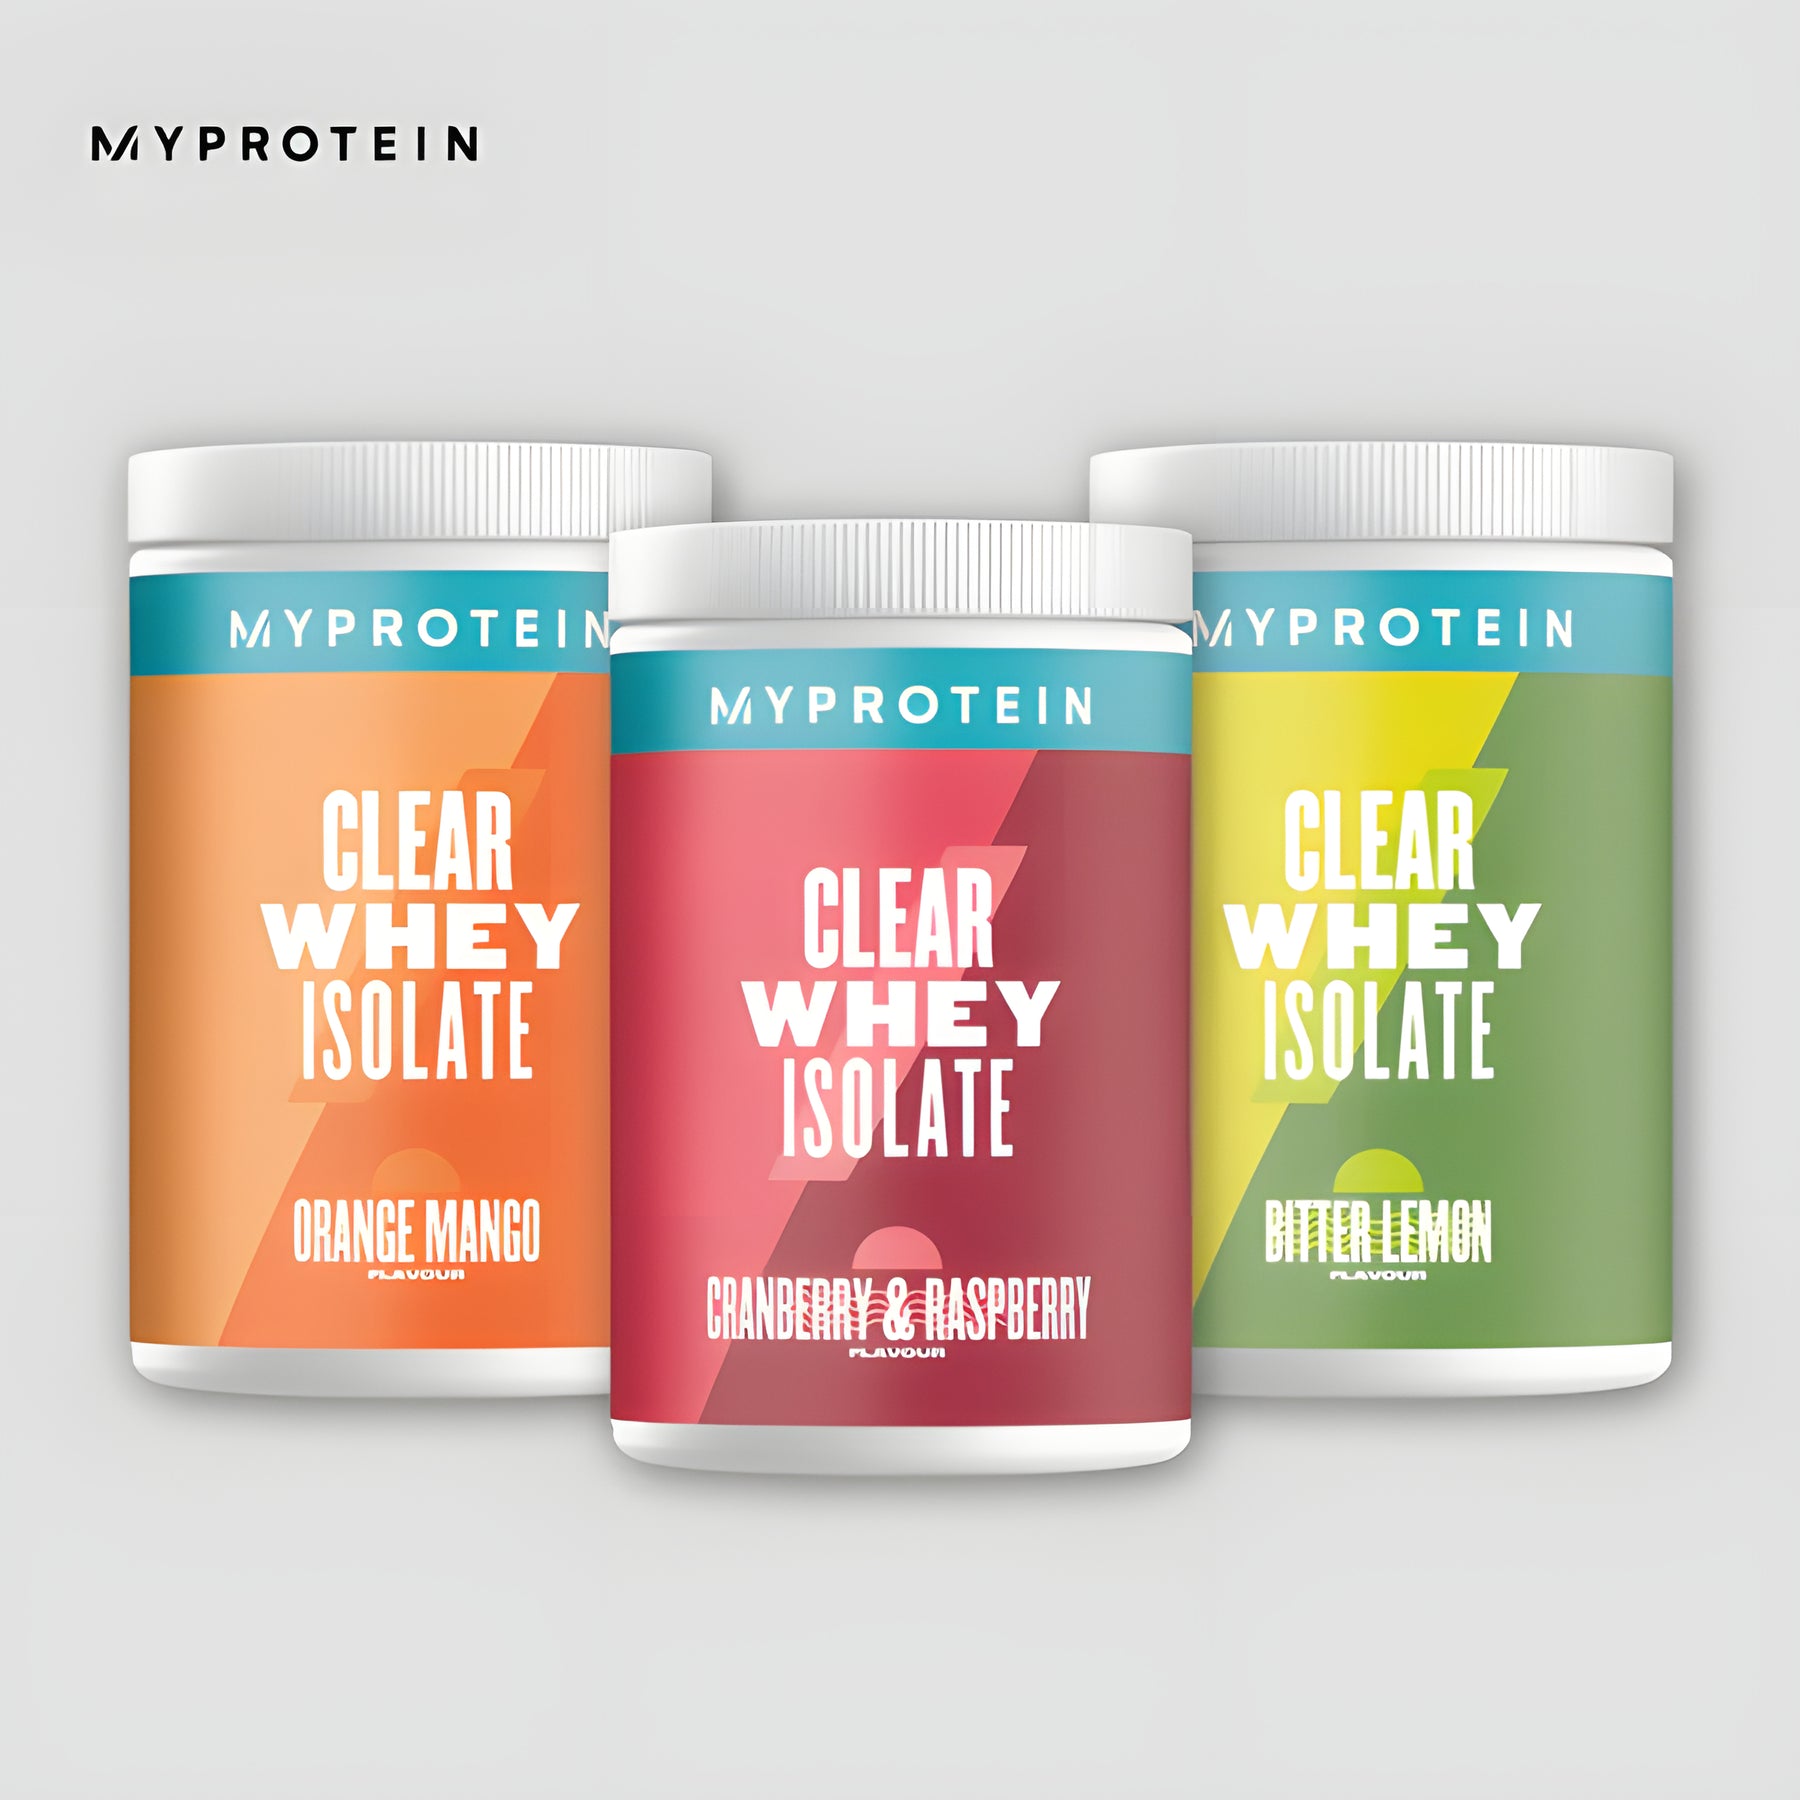 Refreshing Your Protein Game: MyProtein Clear Whey Isolate Unveiled